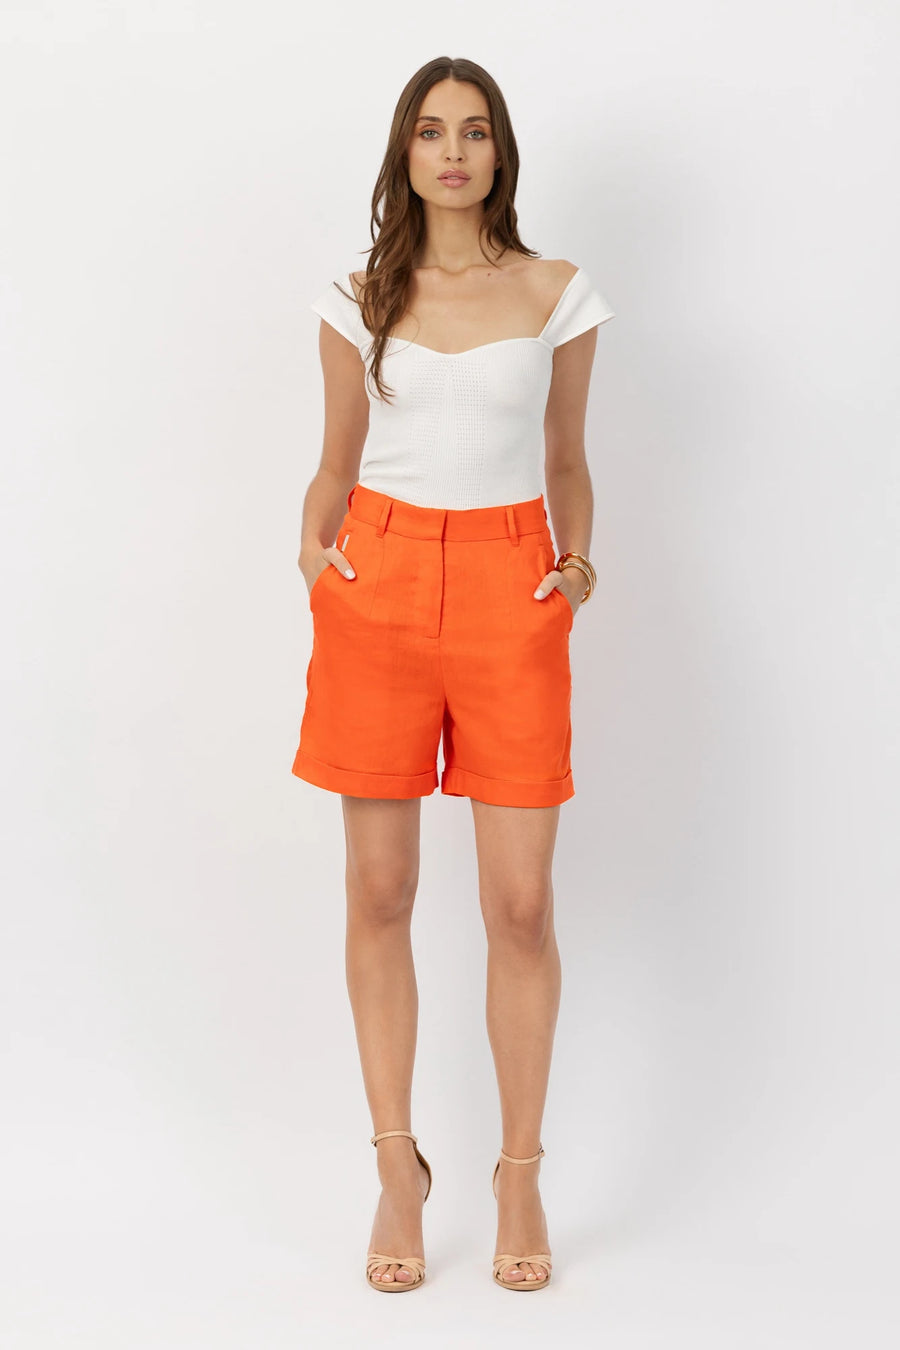 The Remi cuff shorts in orange crush by Greyven